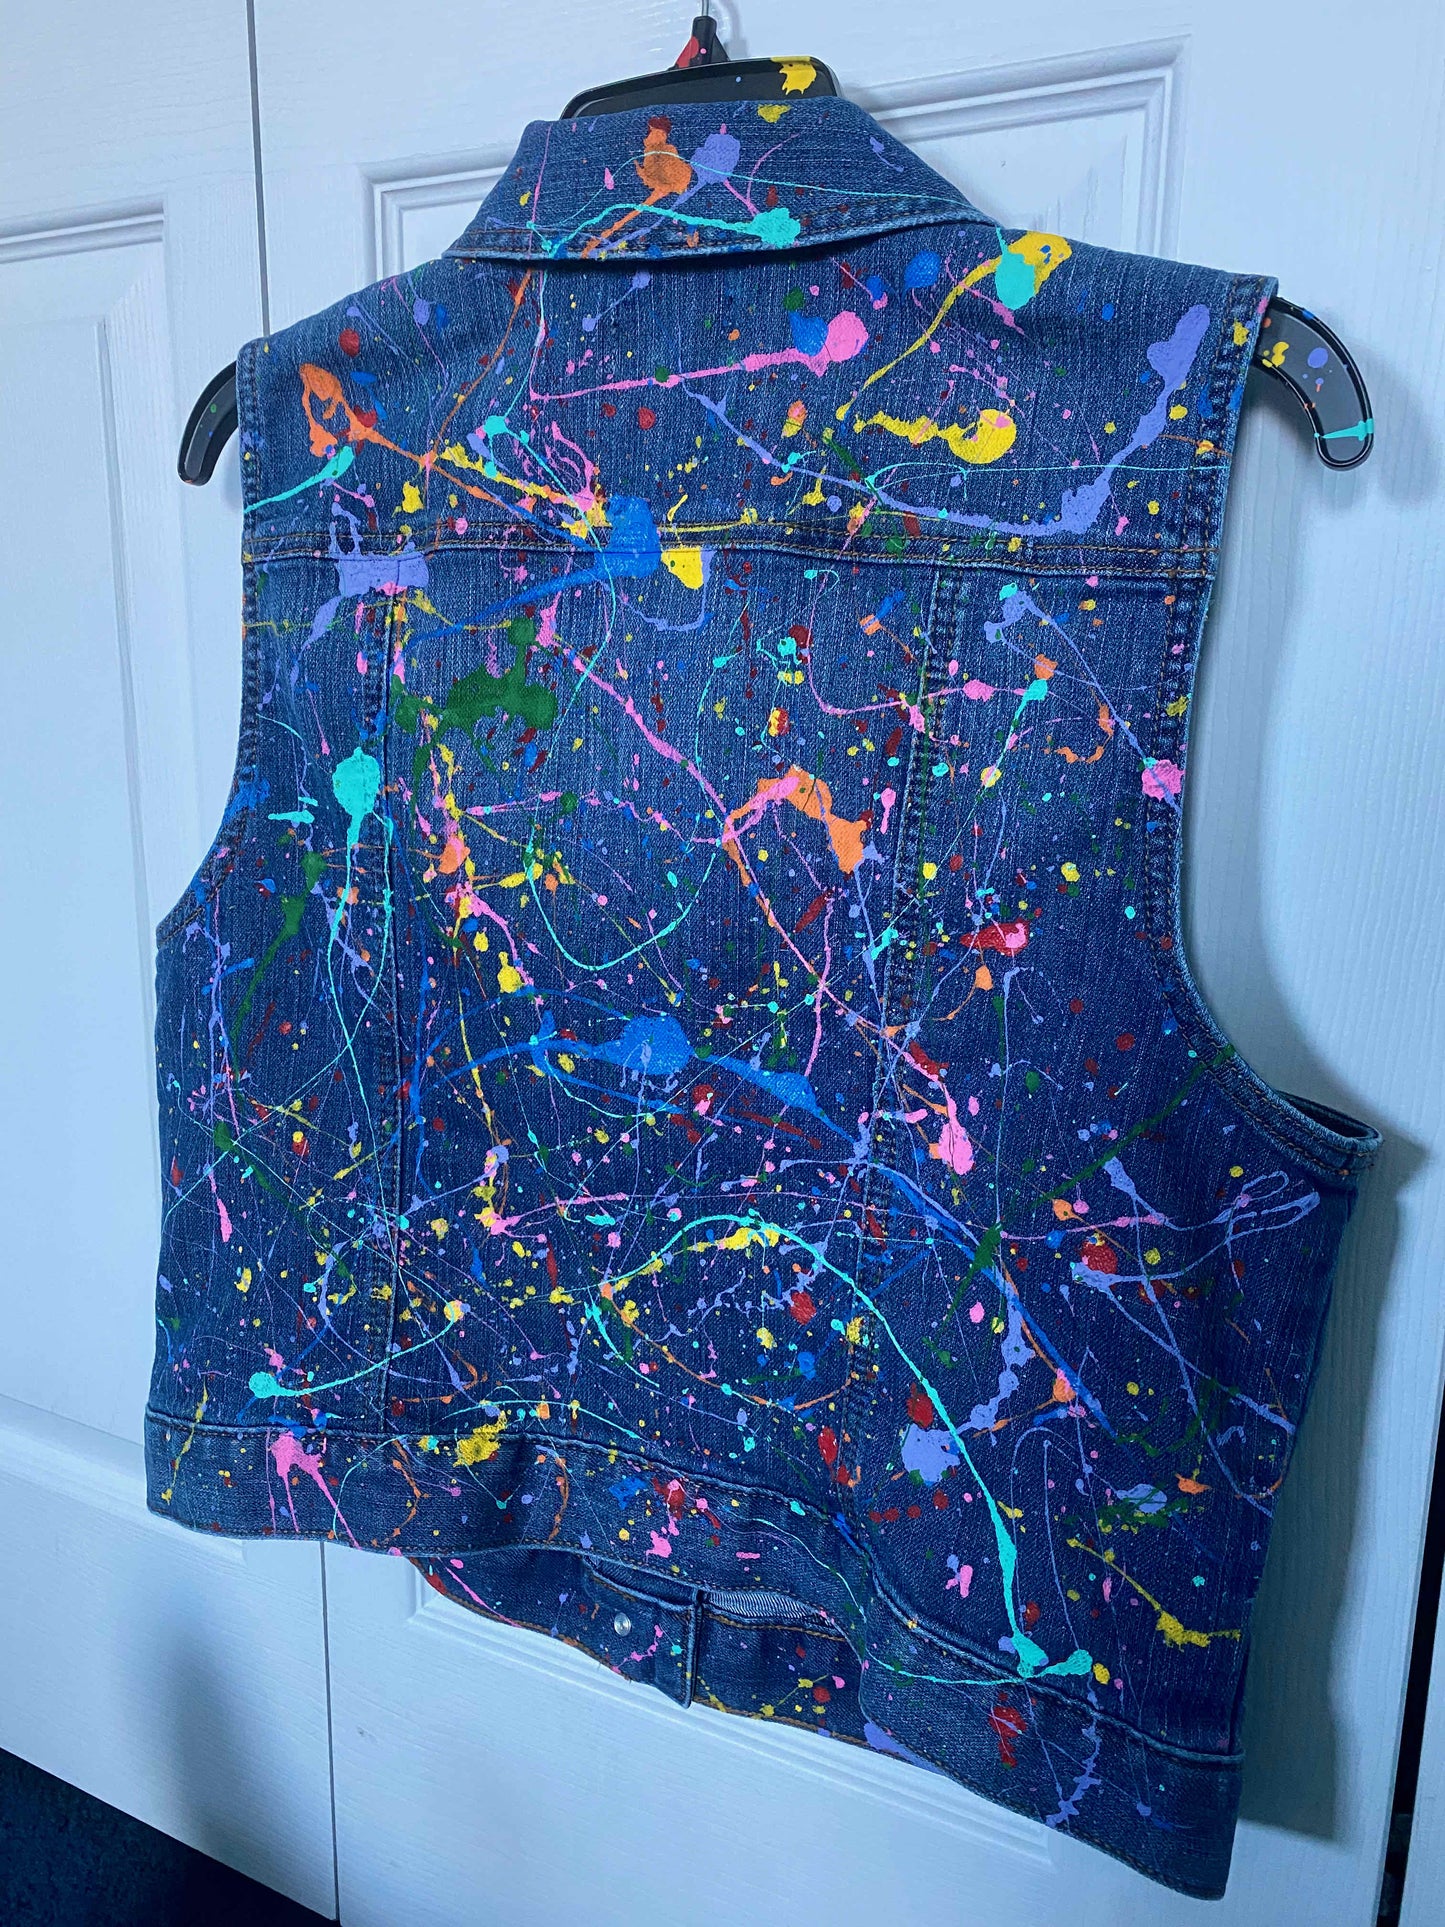 This is a one of kind custom splatter paint denim vest that is meant to make a statement. This vest was hand painted and carefully designed. 